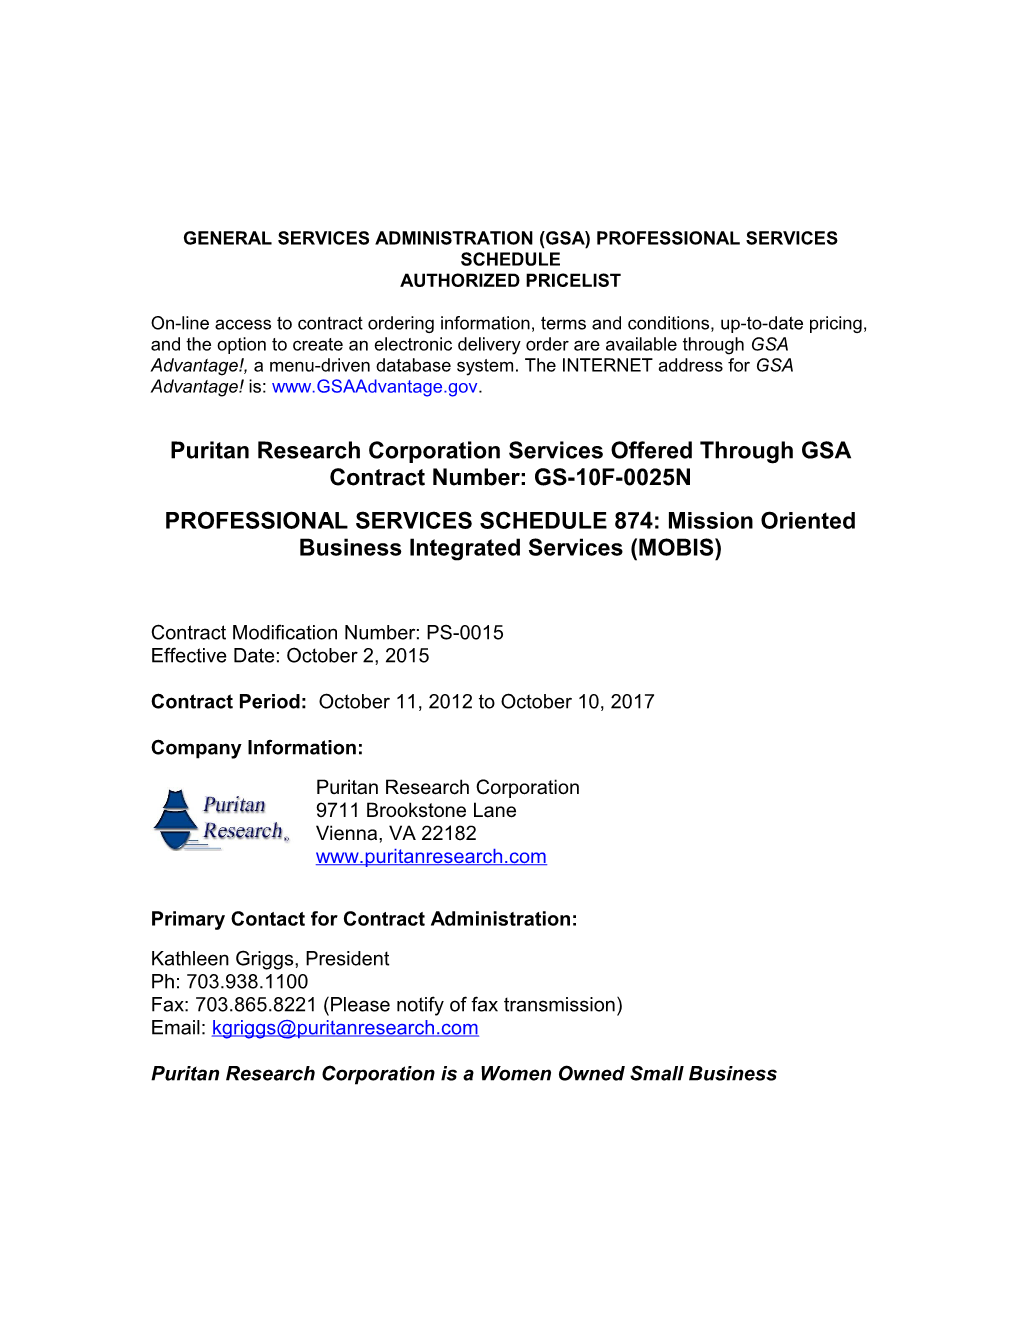 General Services Administration (Gsa) Professional Services Schedule